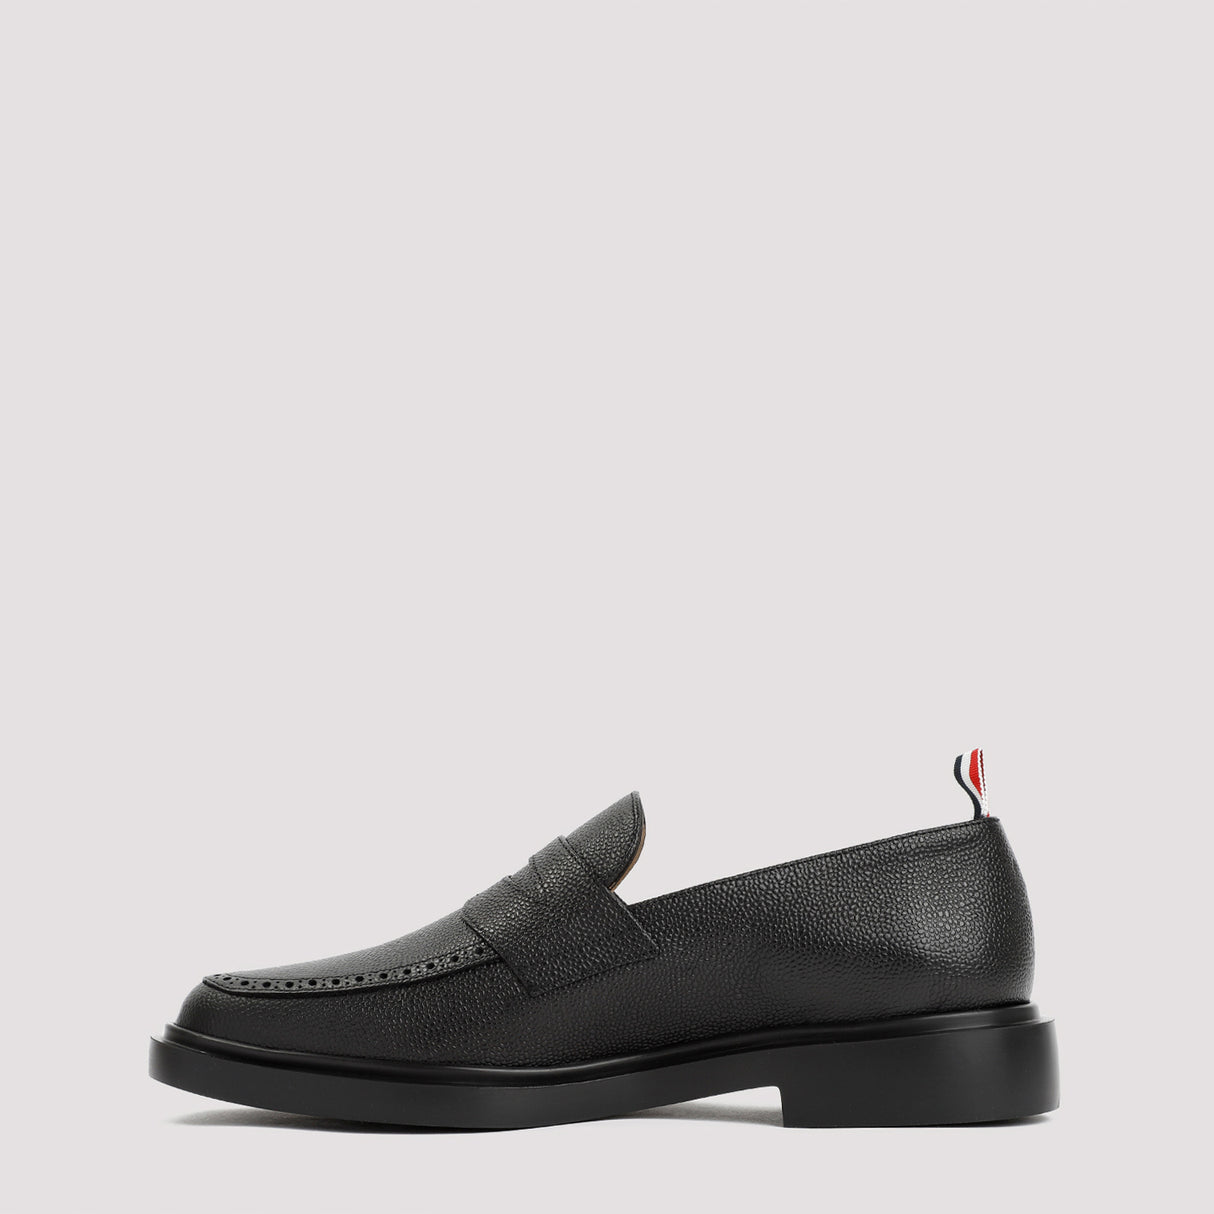 THOM BROWNE Luxurious Men's Pebble Grain Leather Loafers with Iconic Tricolor Detail